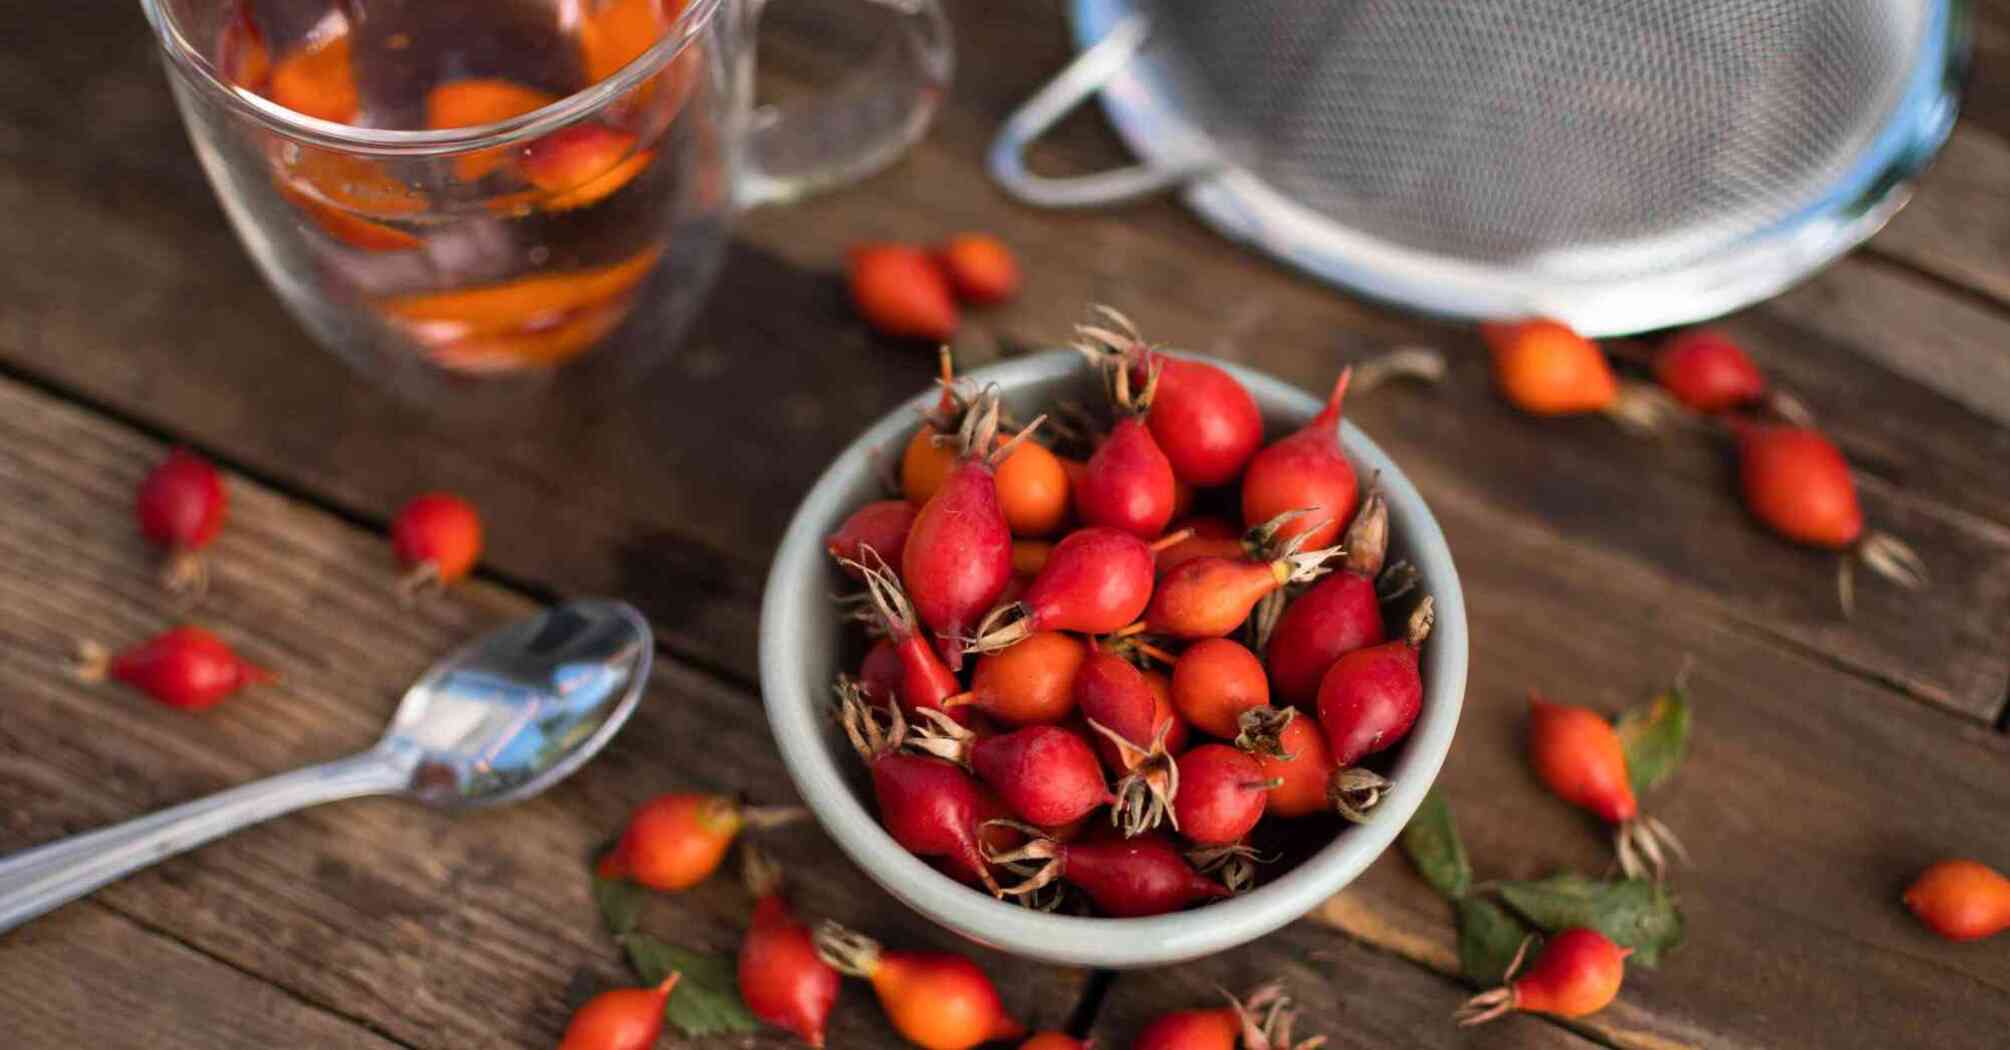 How to brew rose hips correctly